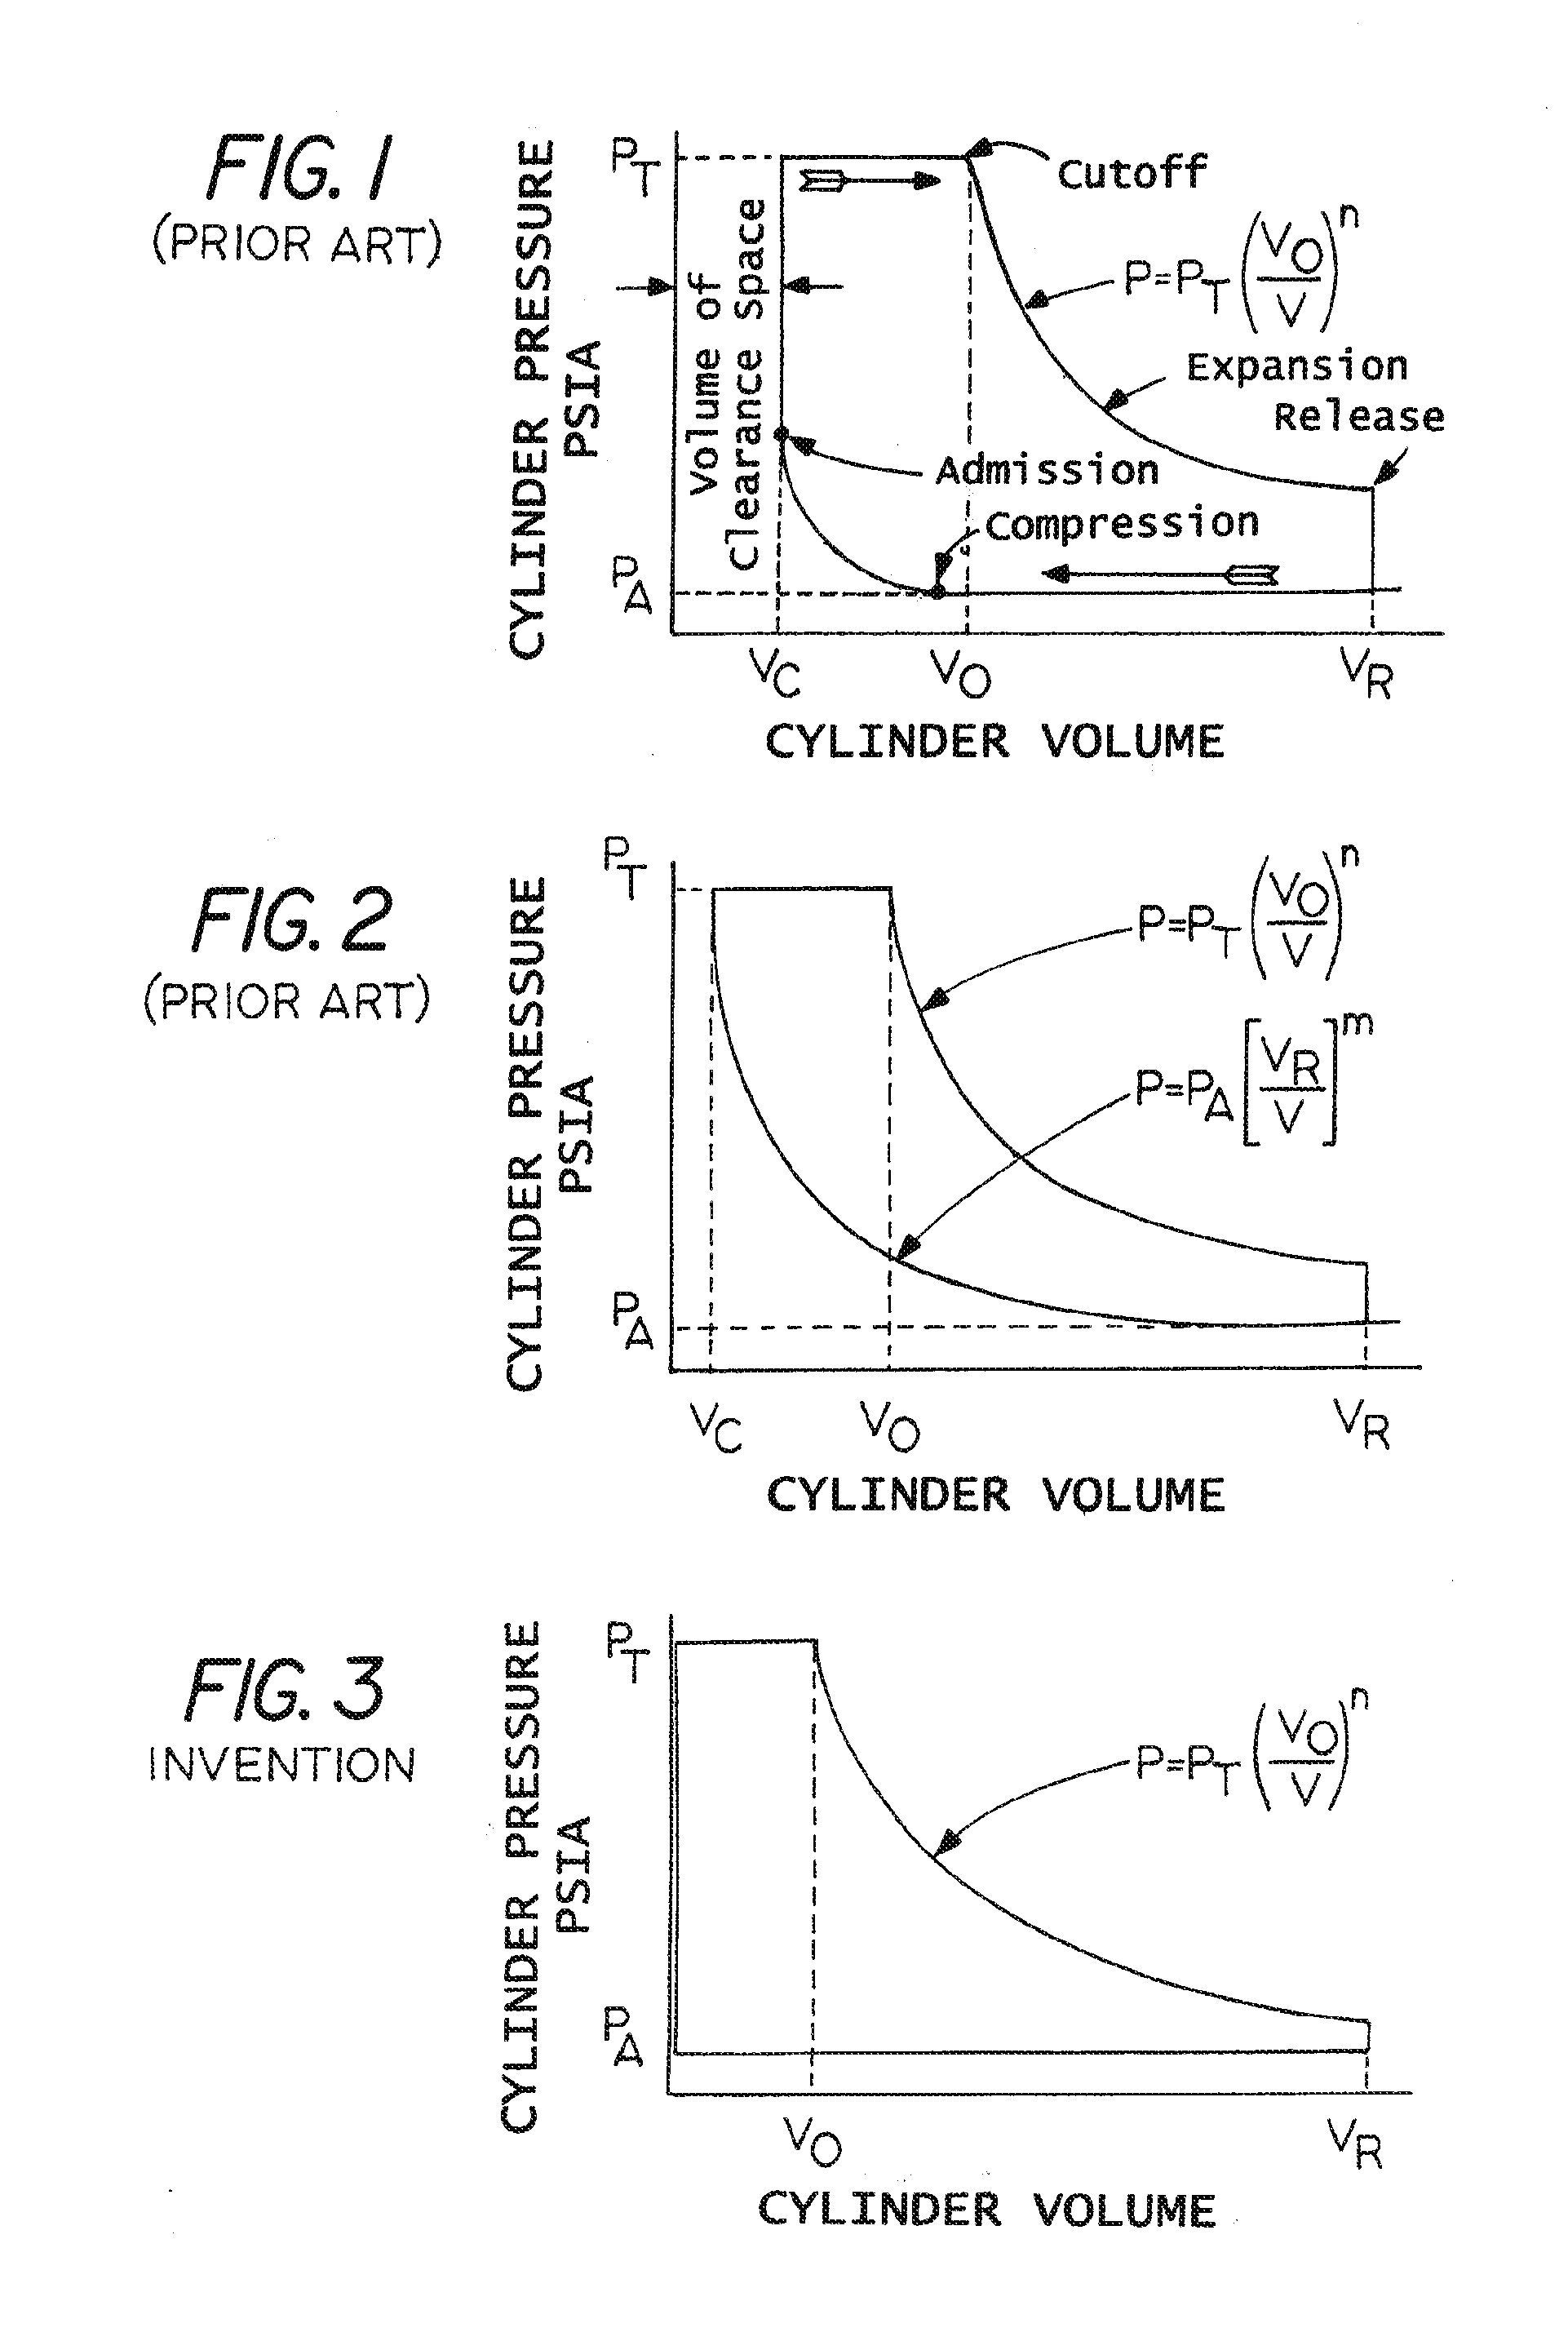 Method and Apparatus For Achieving Higher Thermal Efficiency In A Steam Engine or Steam Expander